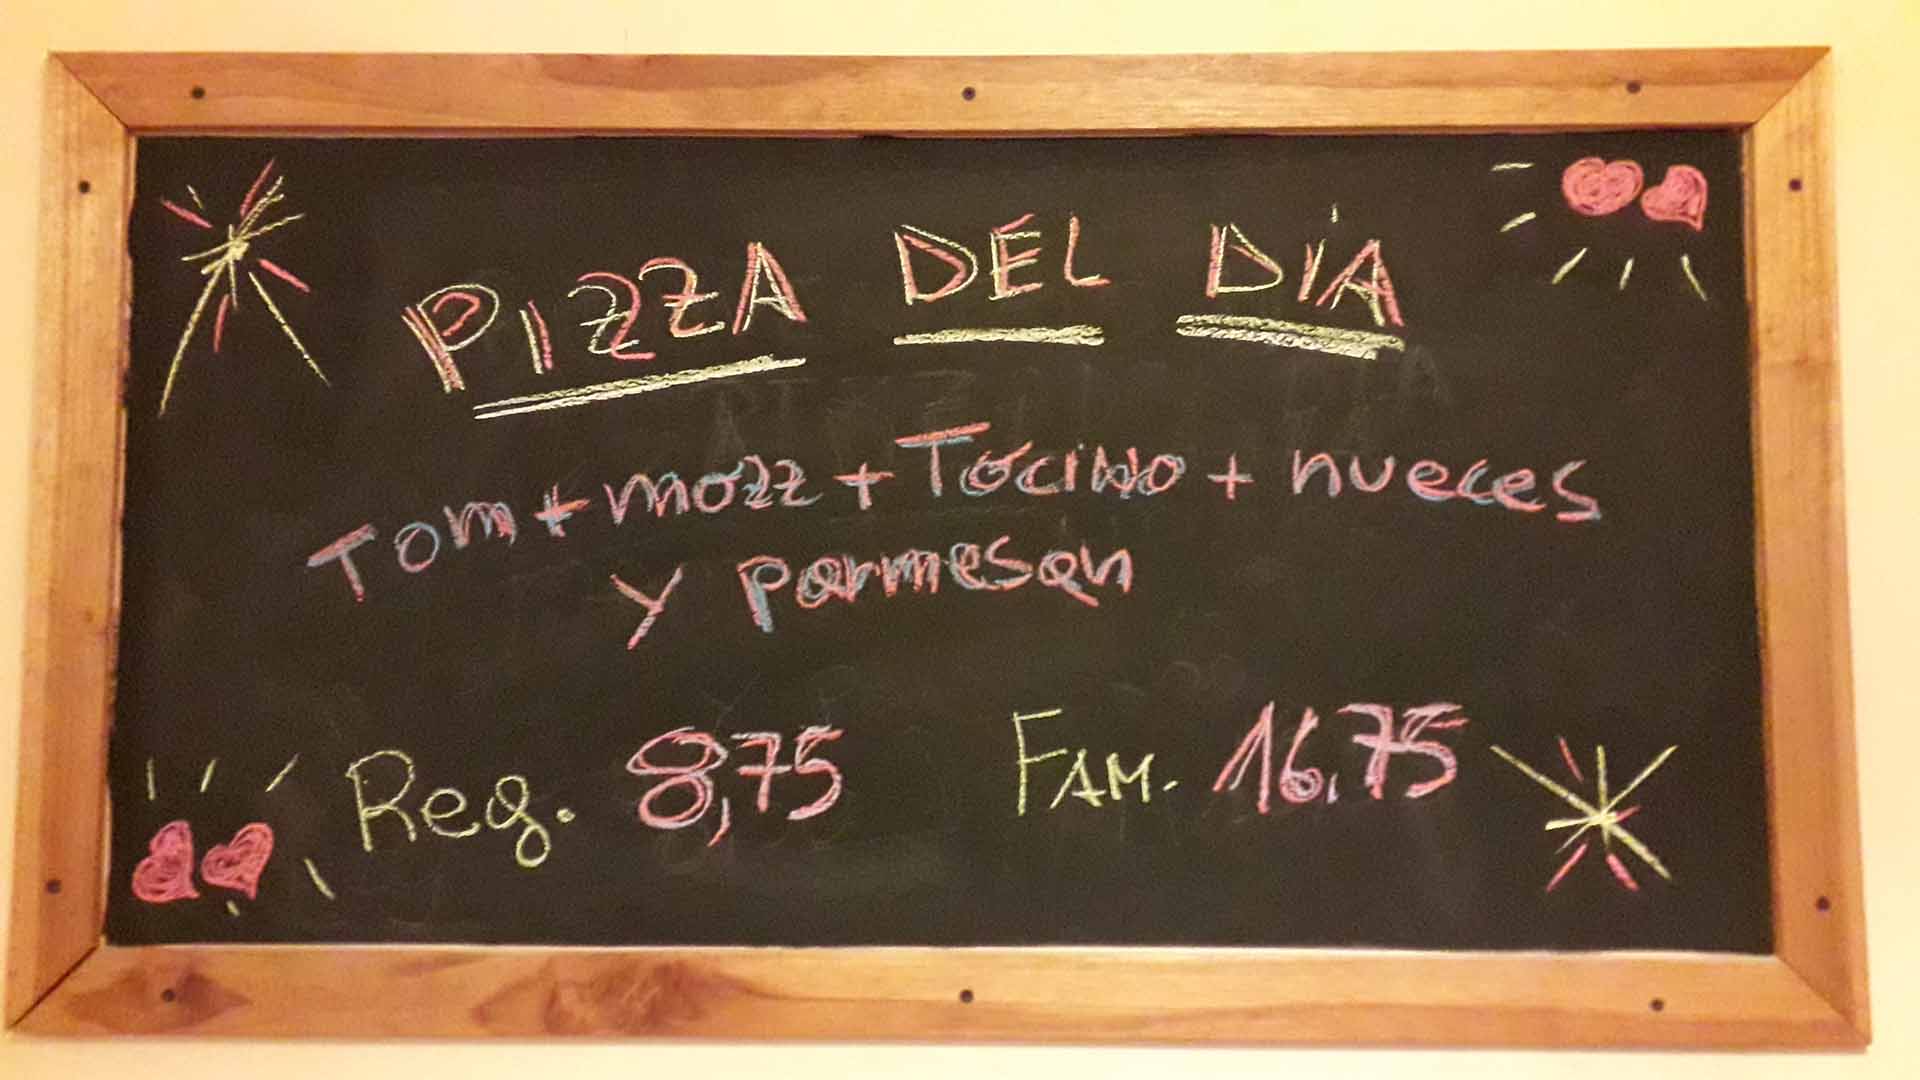 Pizza of the day